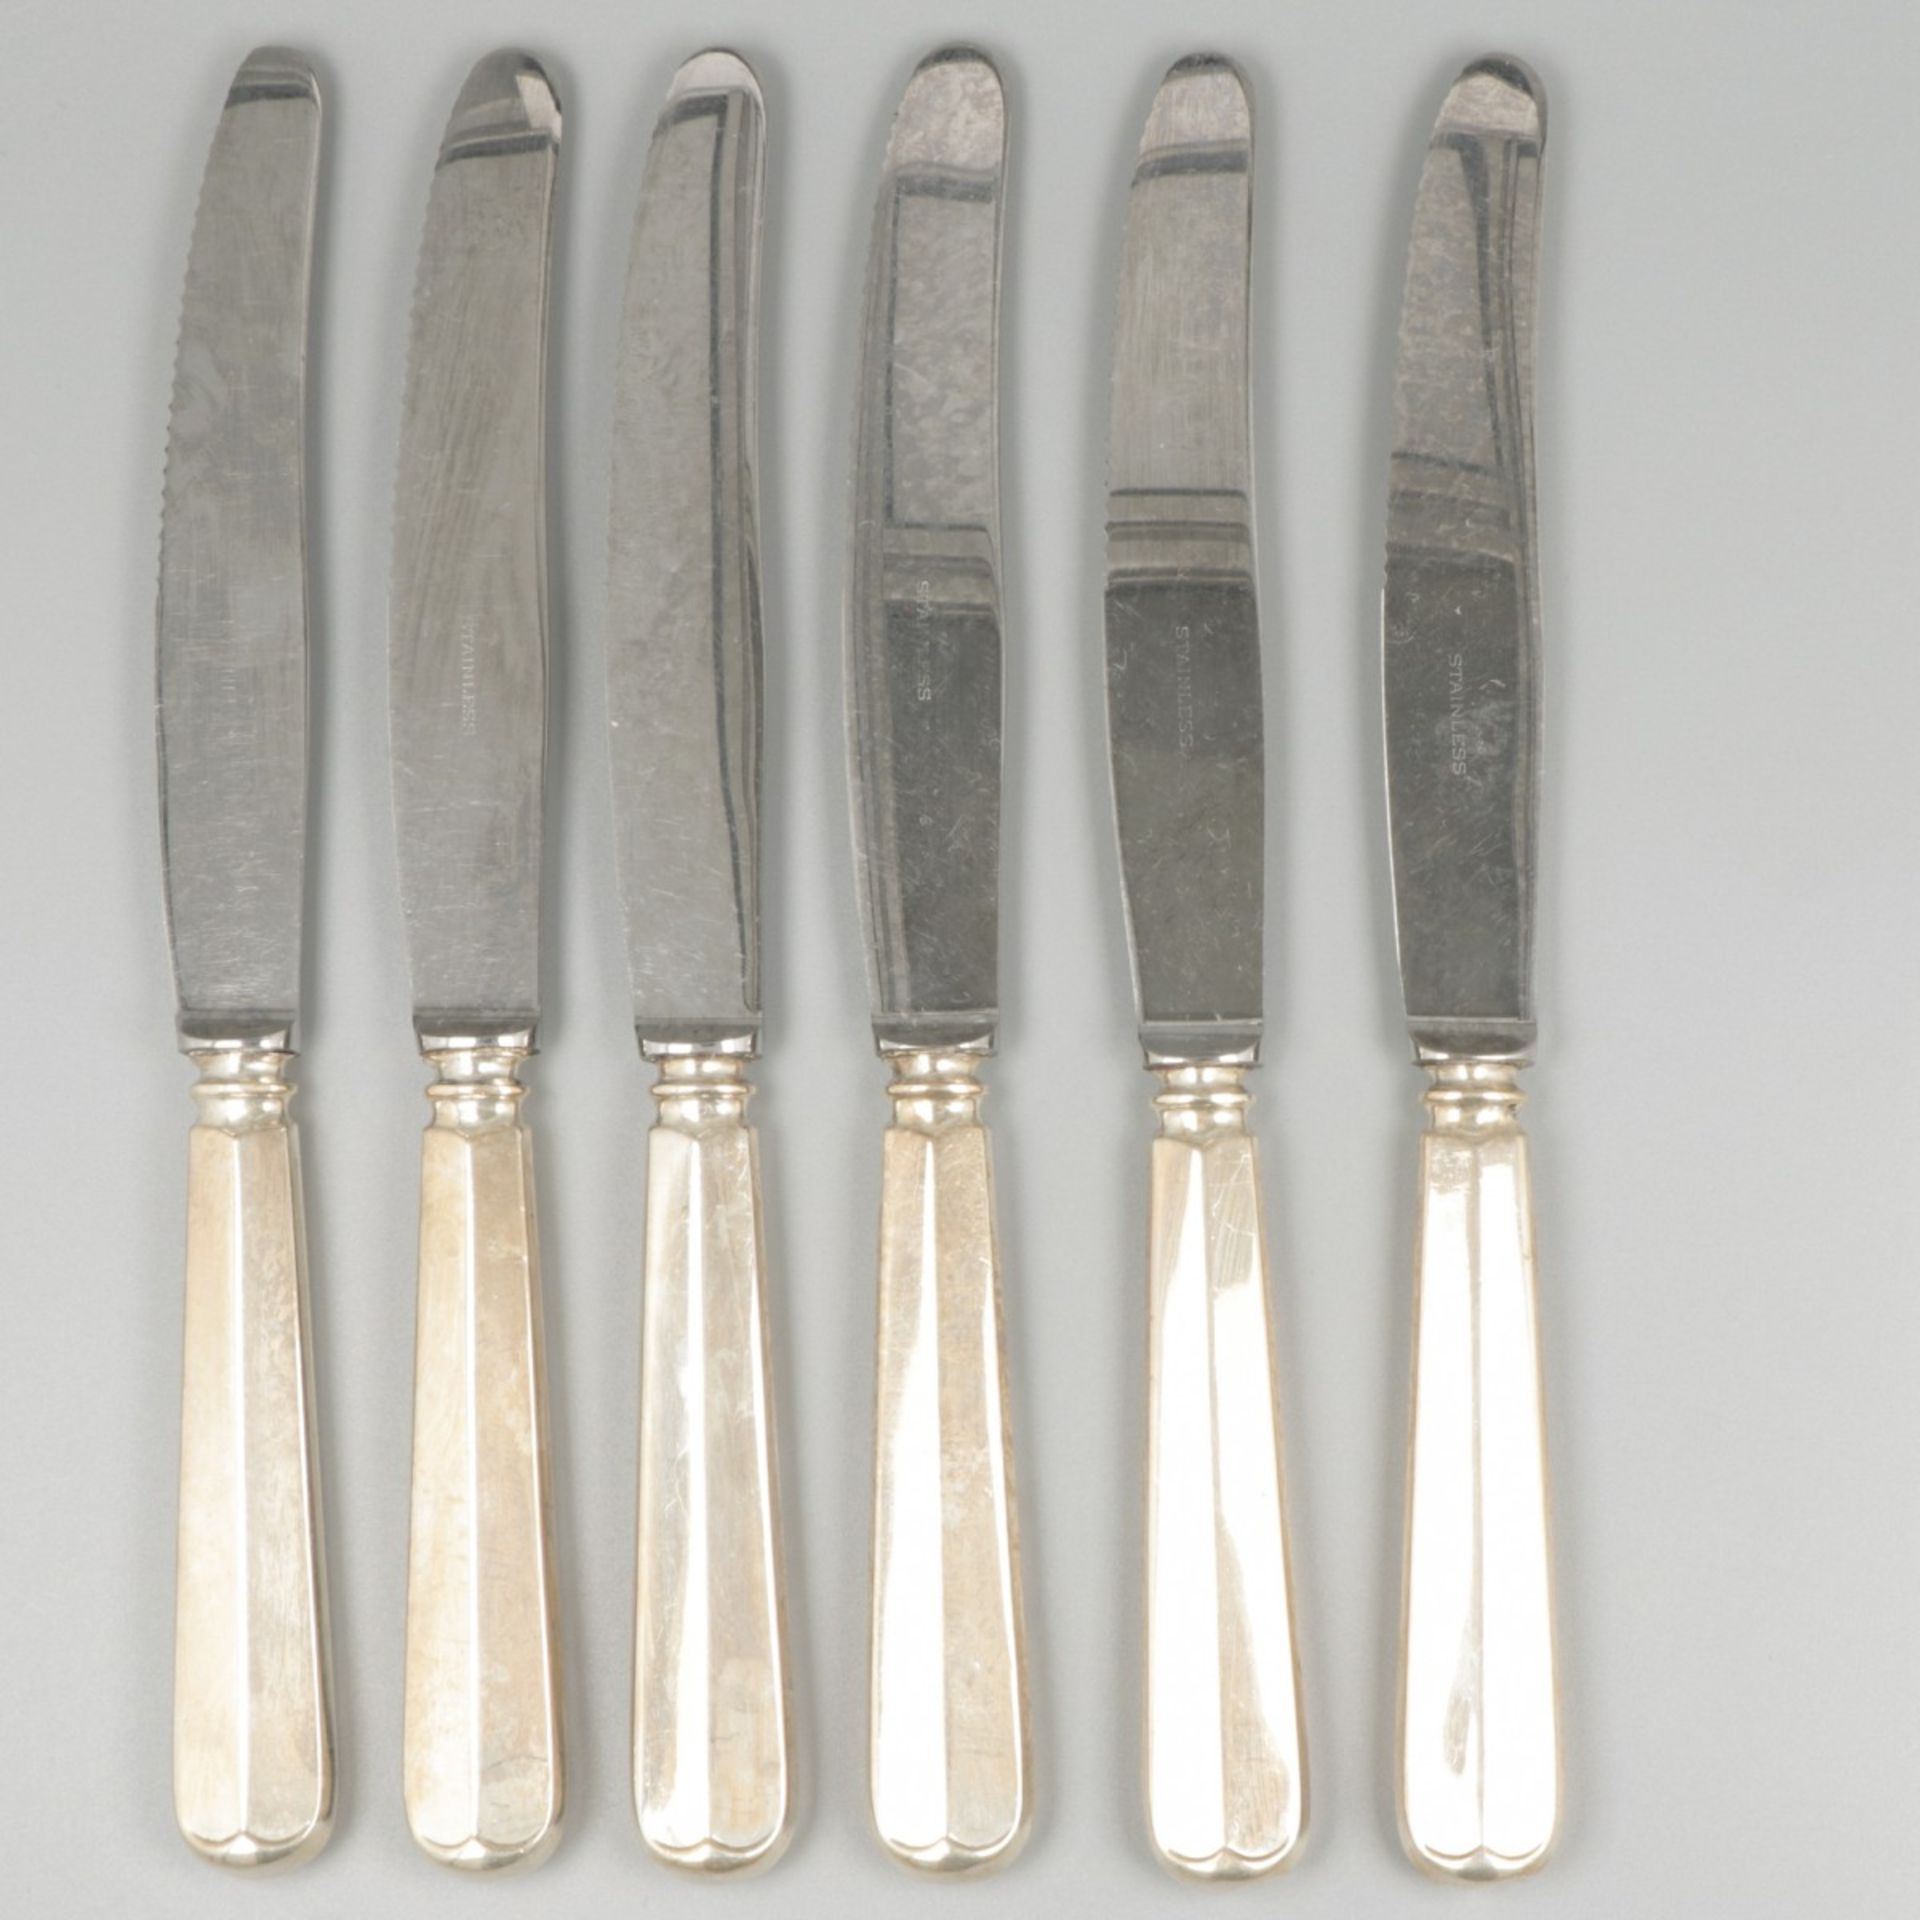 6-piece set dinner knives "Haags Lofje" silver. - Image 2 of 6